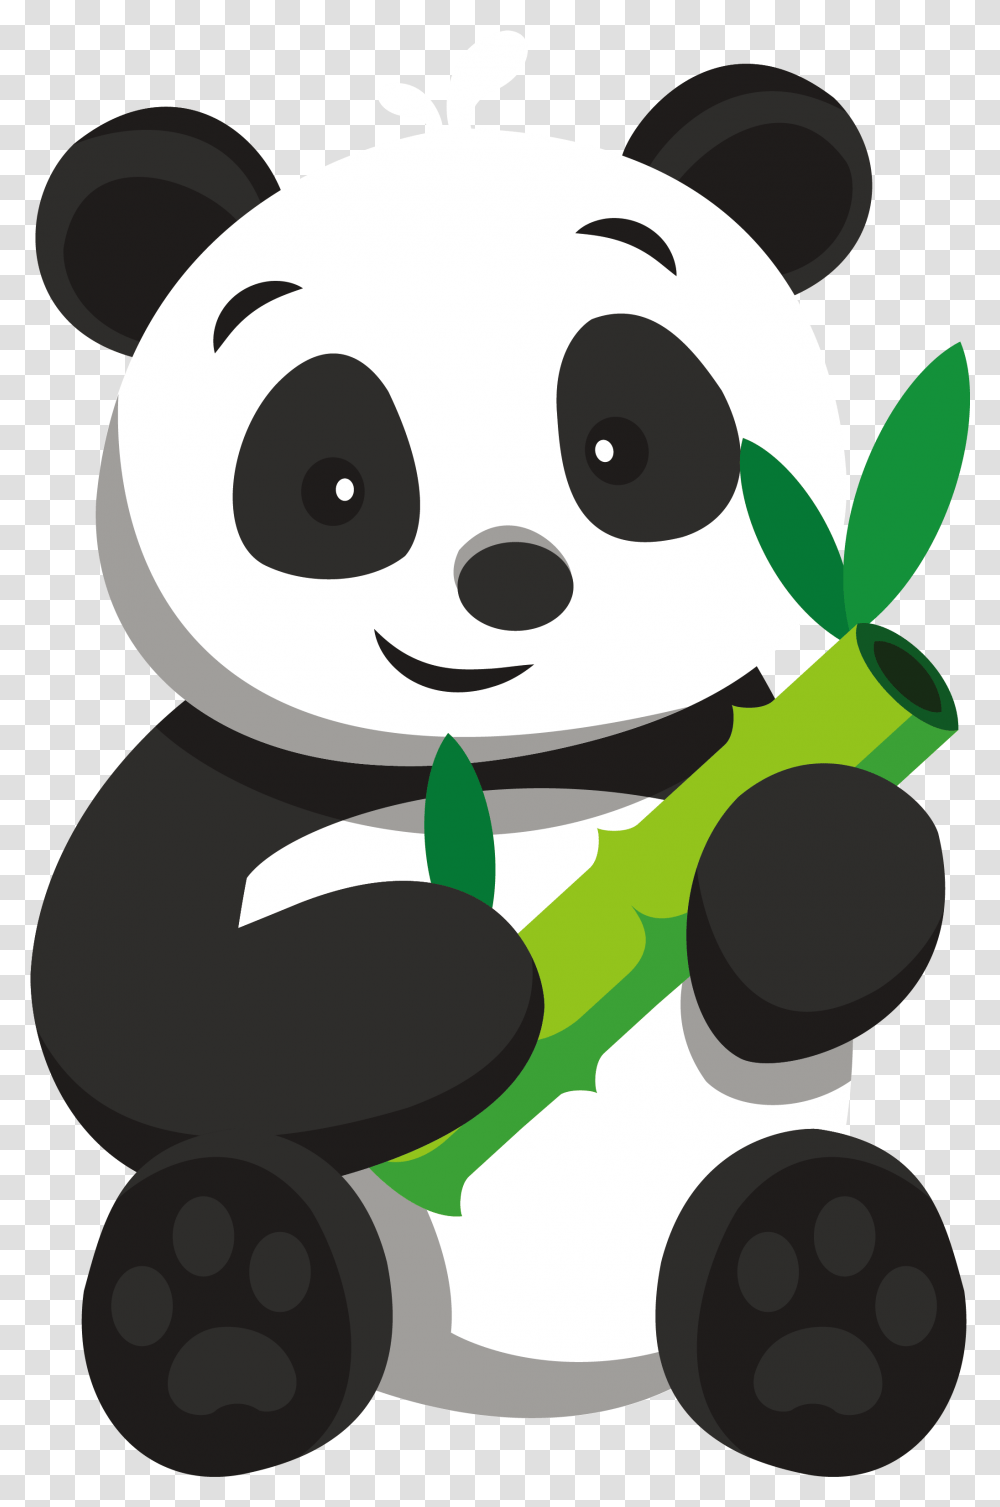 Library Of Bamboo Tree Image Files Clipart Images Of Panda, Face, Graphics, Stencil, Photography Transparent Png